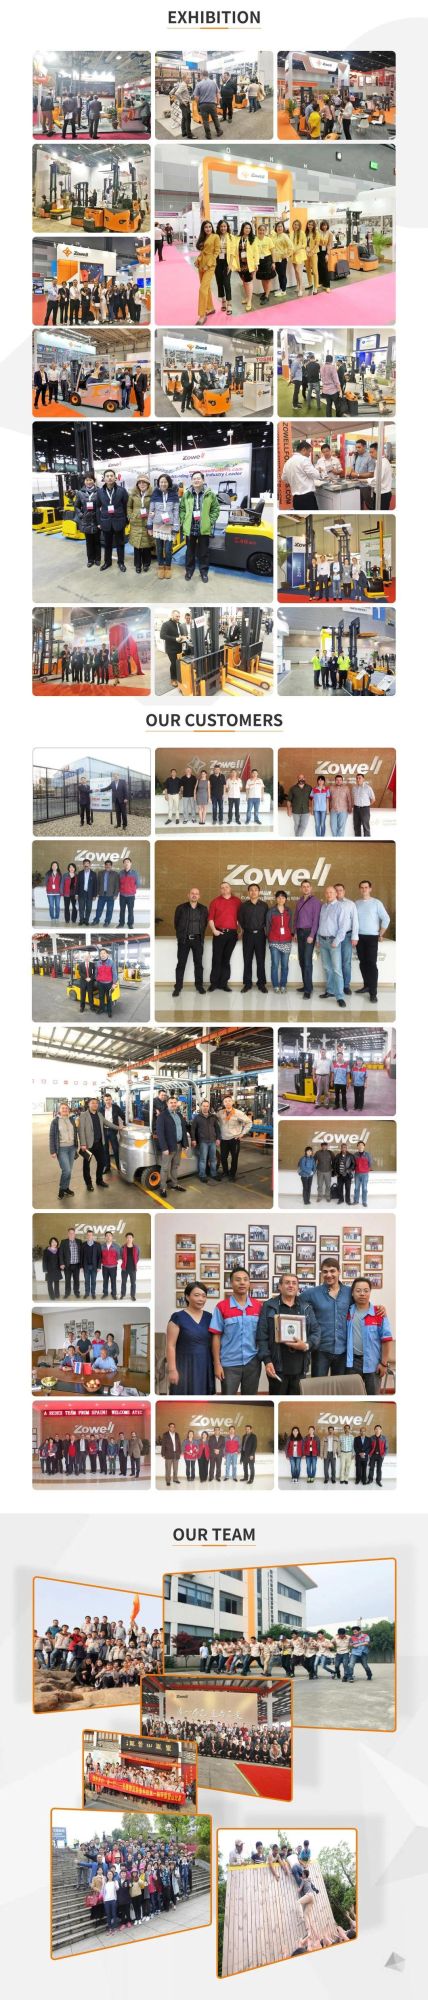 Zowell Lithium Hydraulic Inmotion/Curtis Controller Counter Balance Lift Truck CE Approved Electric Lift Truck 4-Wheel Forklift